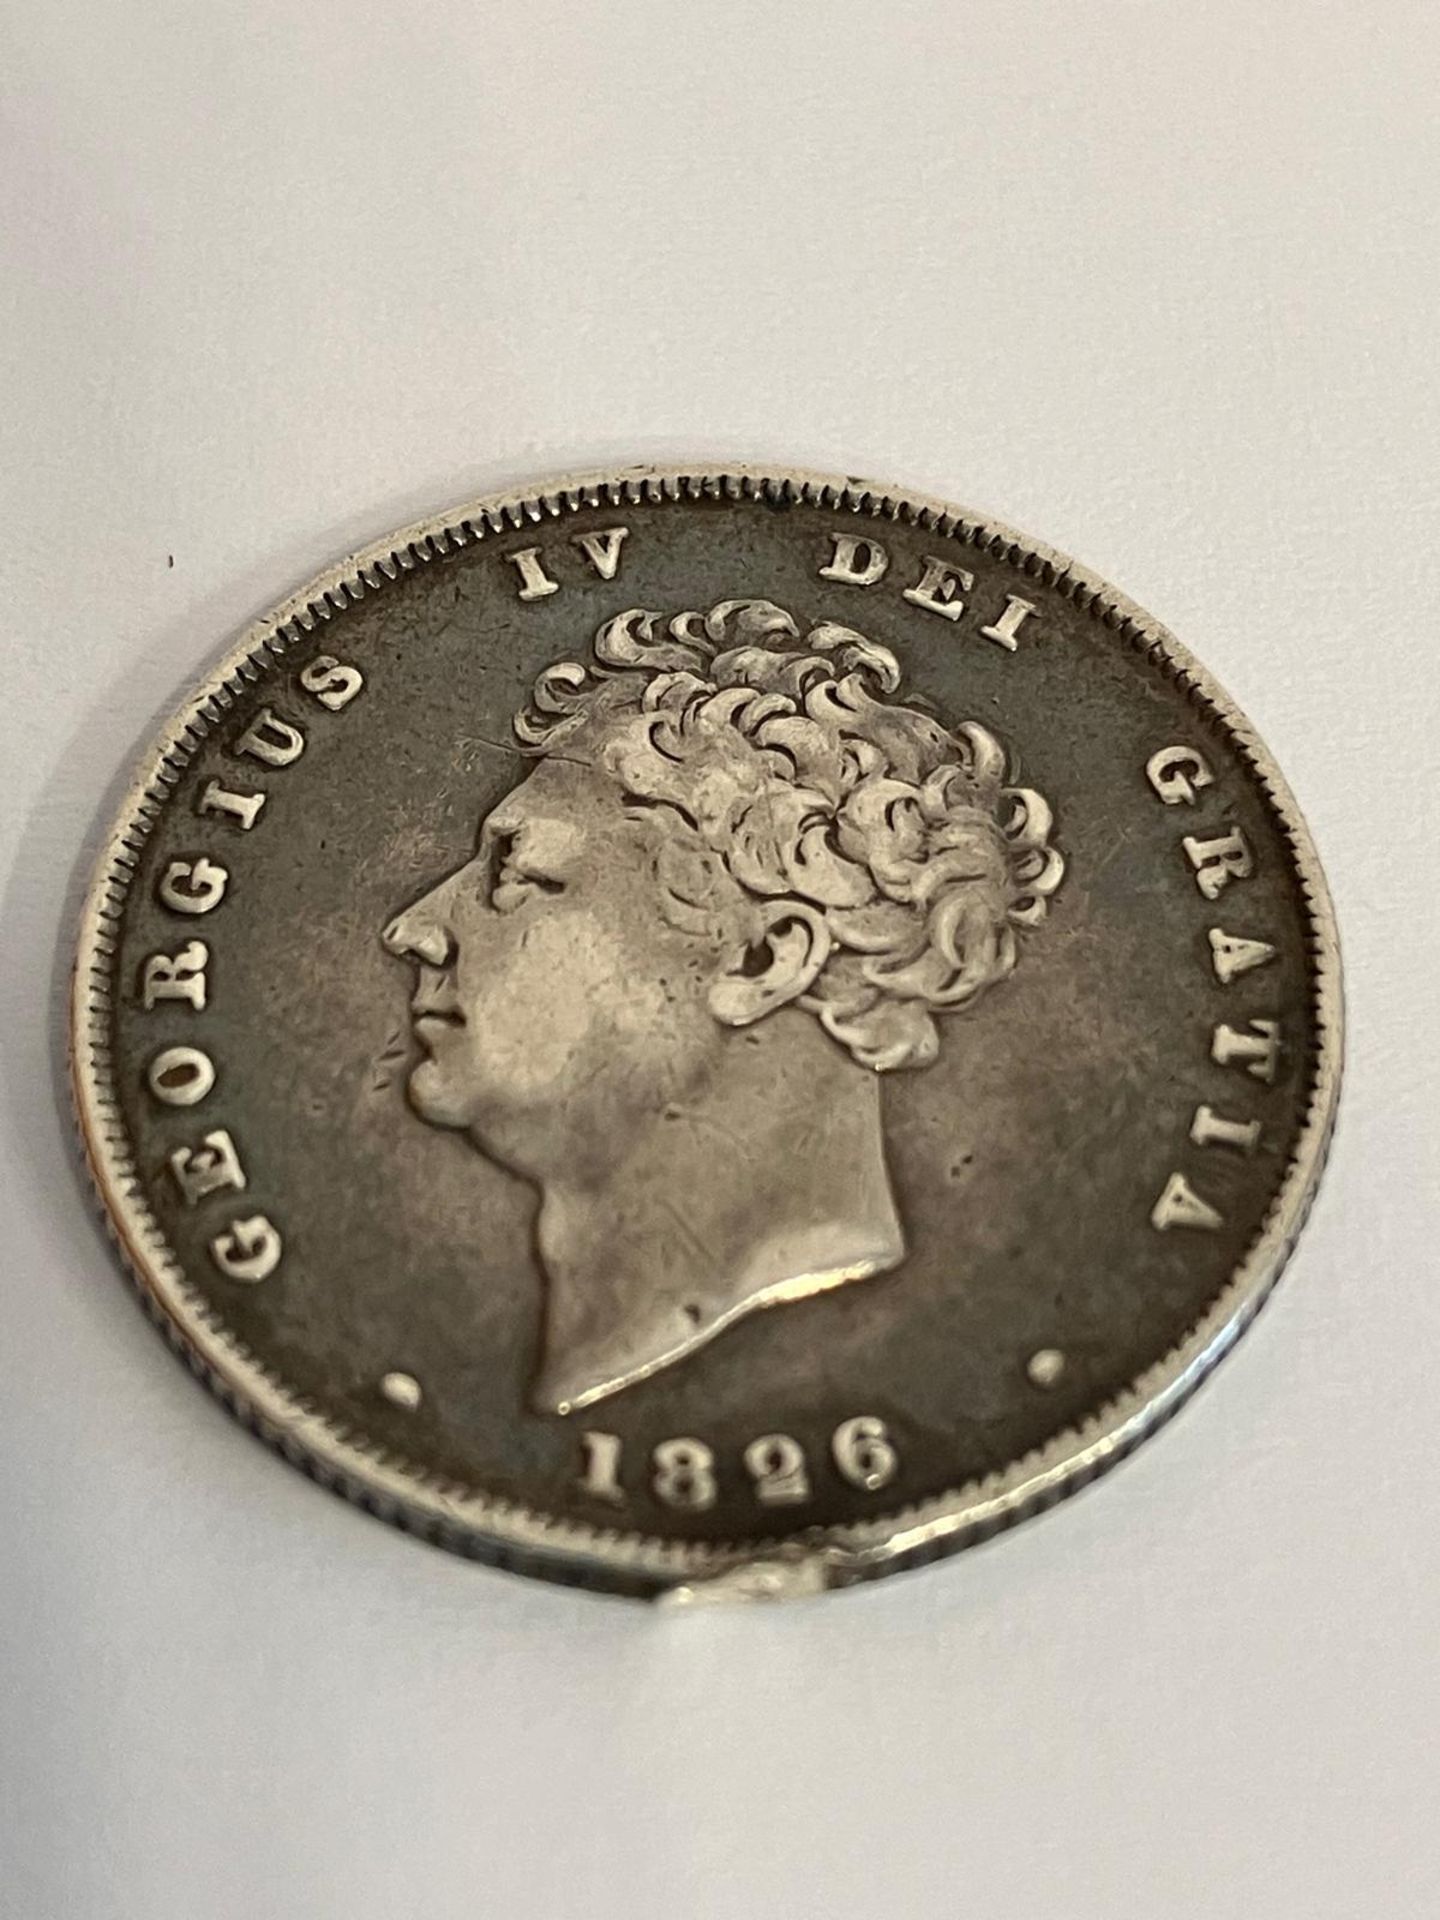 1826 GEORGE IV SILVER SHILLING. Fine Condition. Would have been very fine/ extra fine, but there